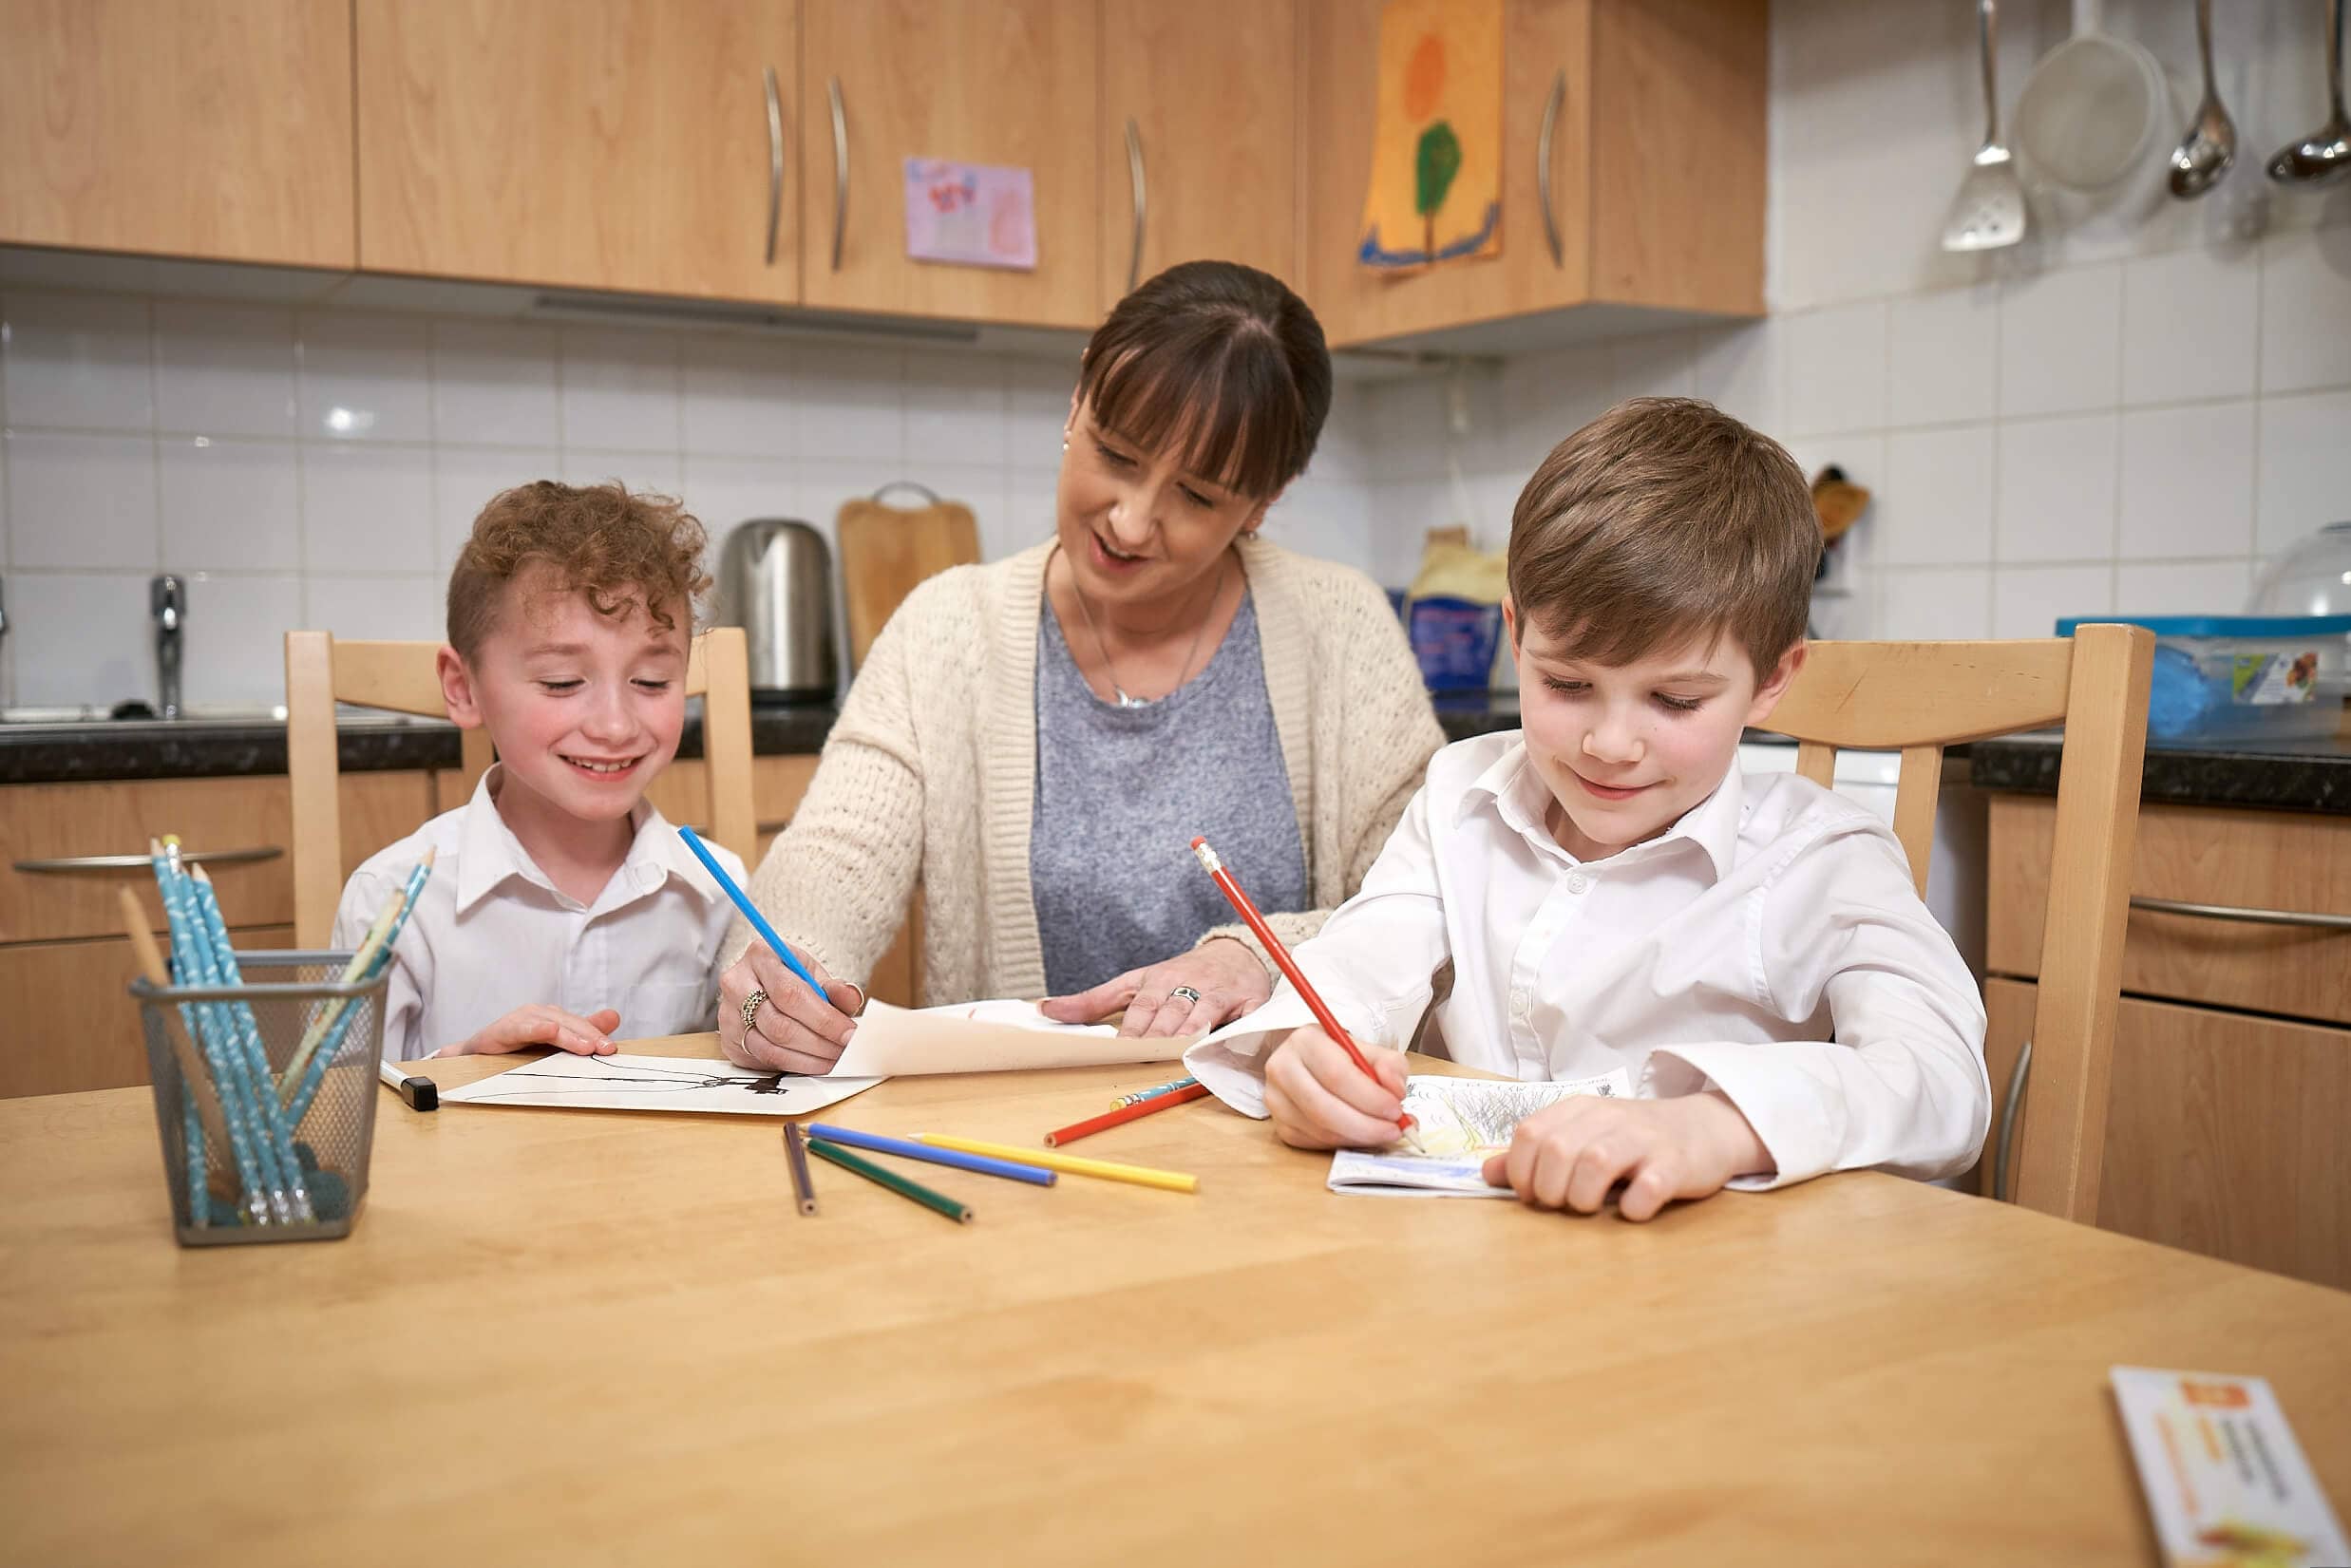 Image of two children sitting at a kitchen table with their mum, smiling and drawing with colouring pencils.